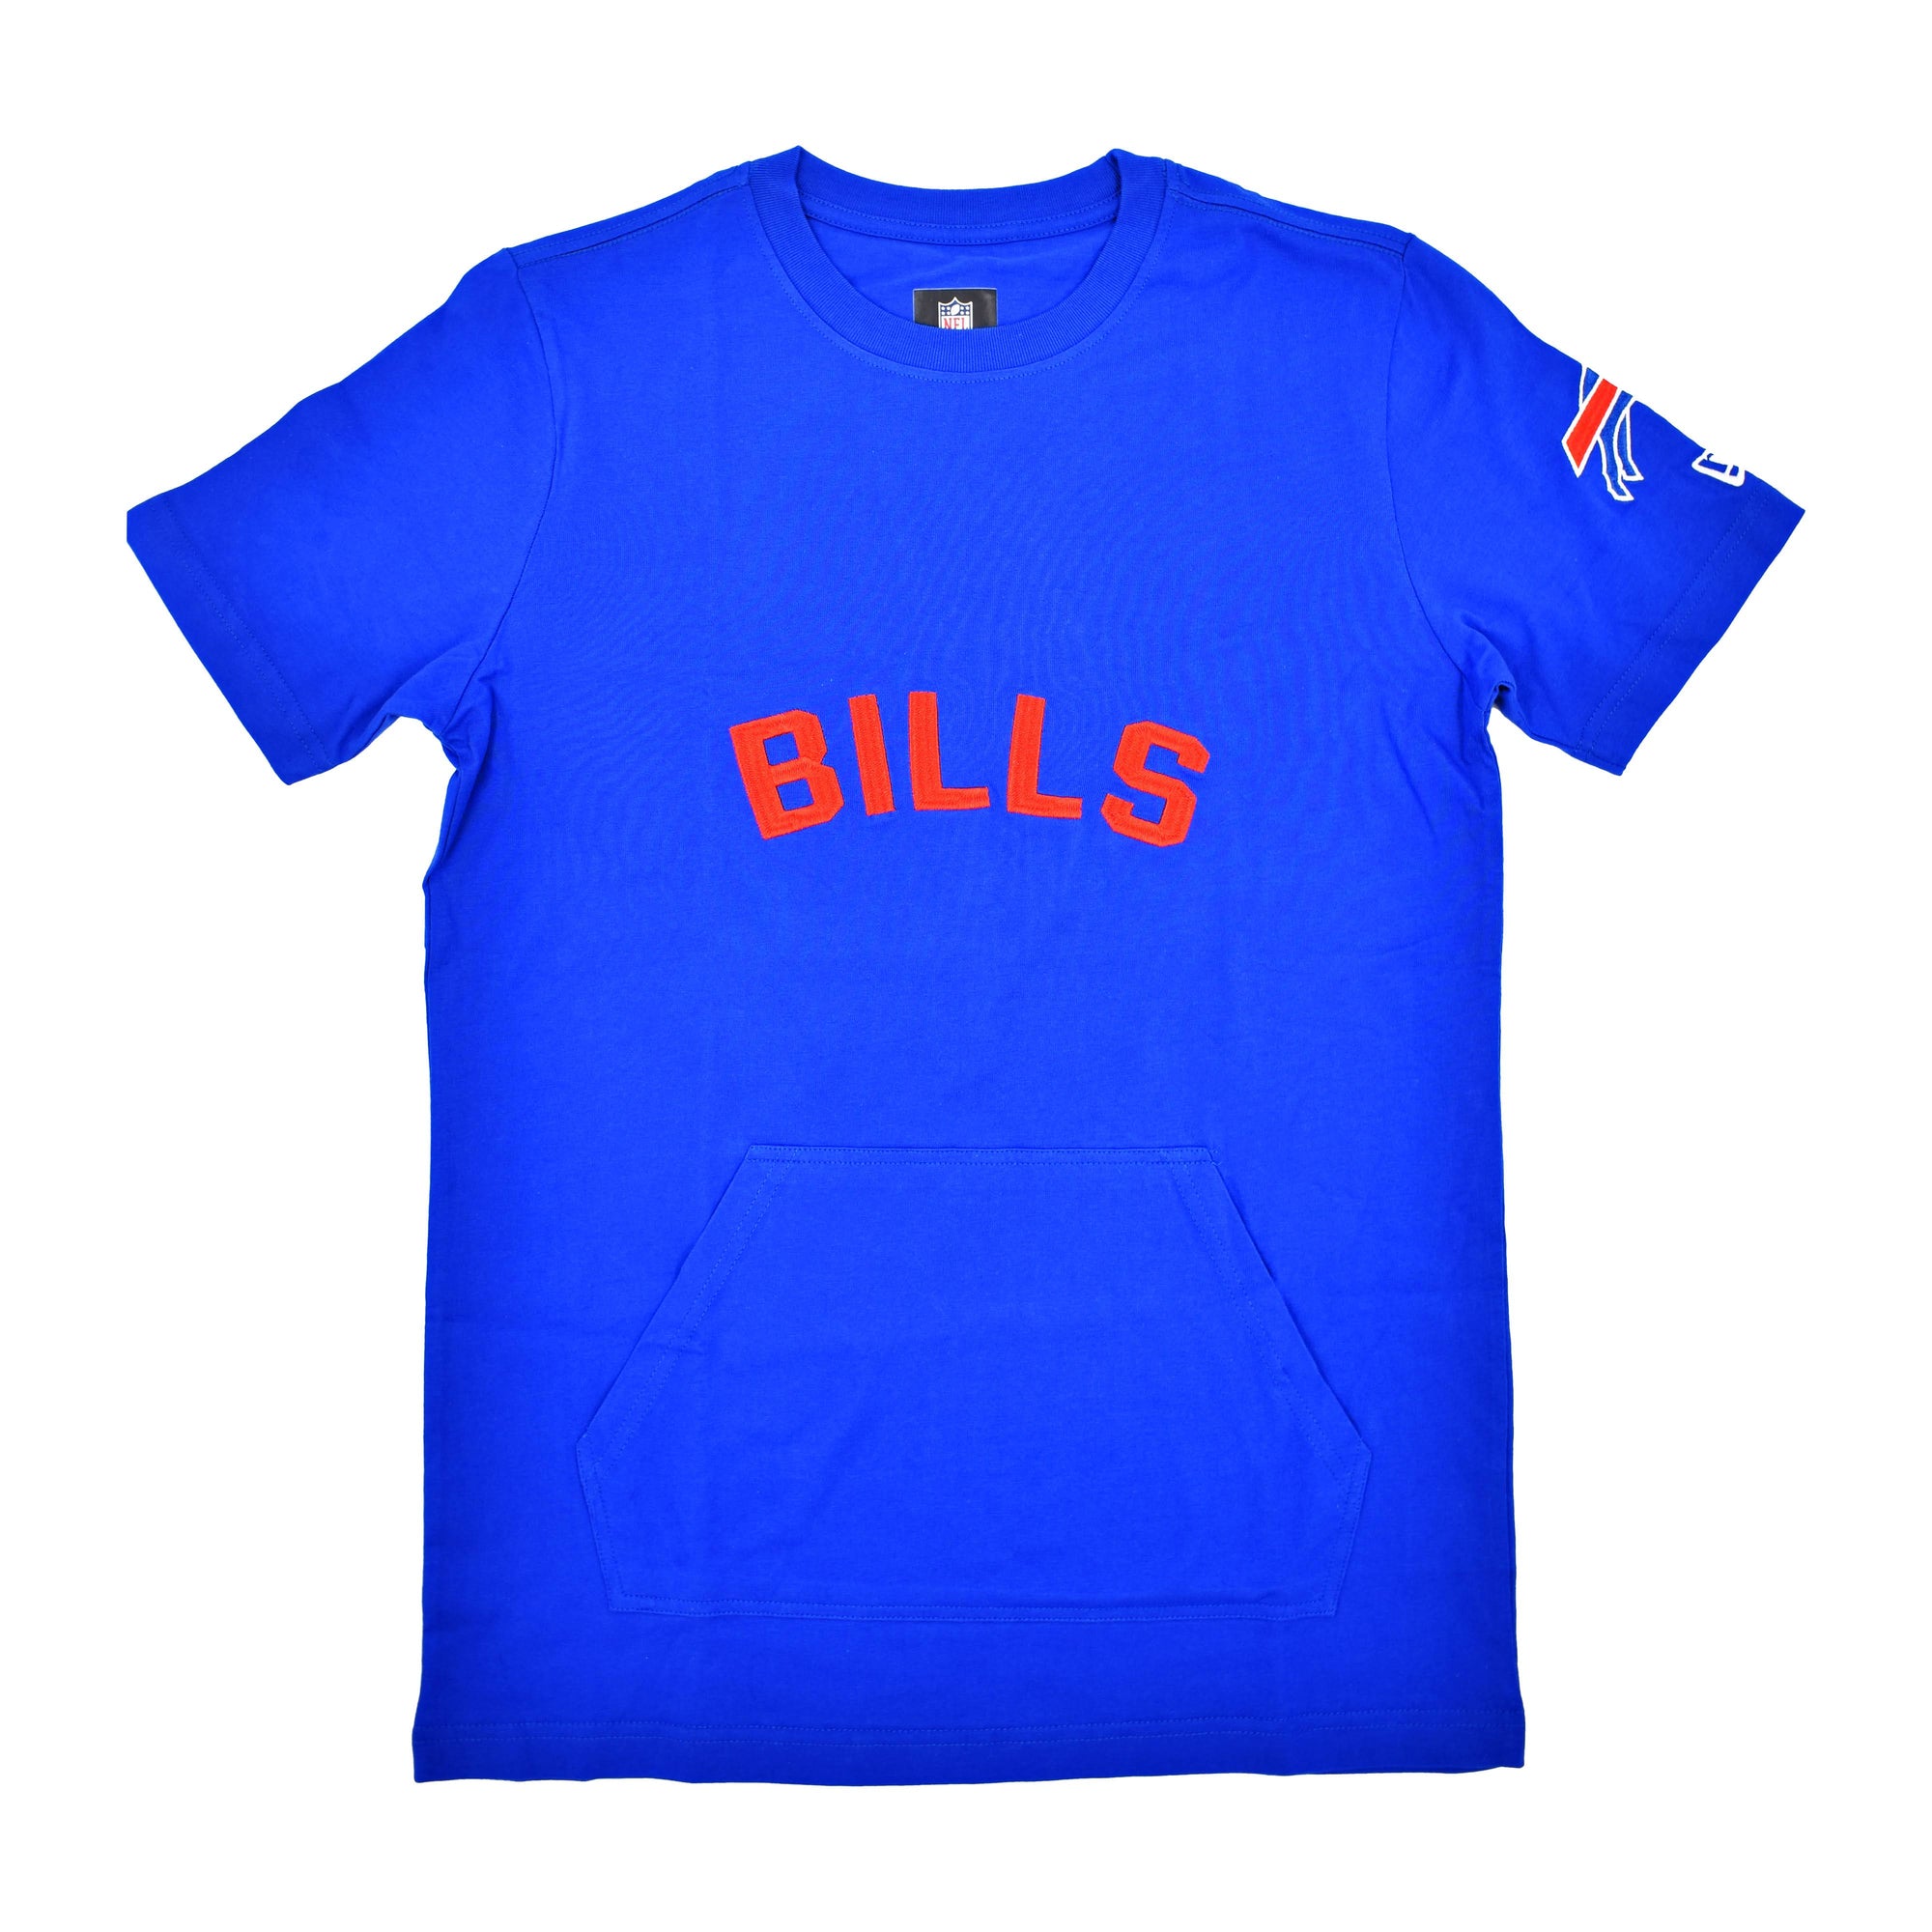 bflo store Buffalo Bills Embroidered with Charging Buffalo Short Sleeve Shirt with front pocket